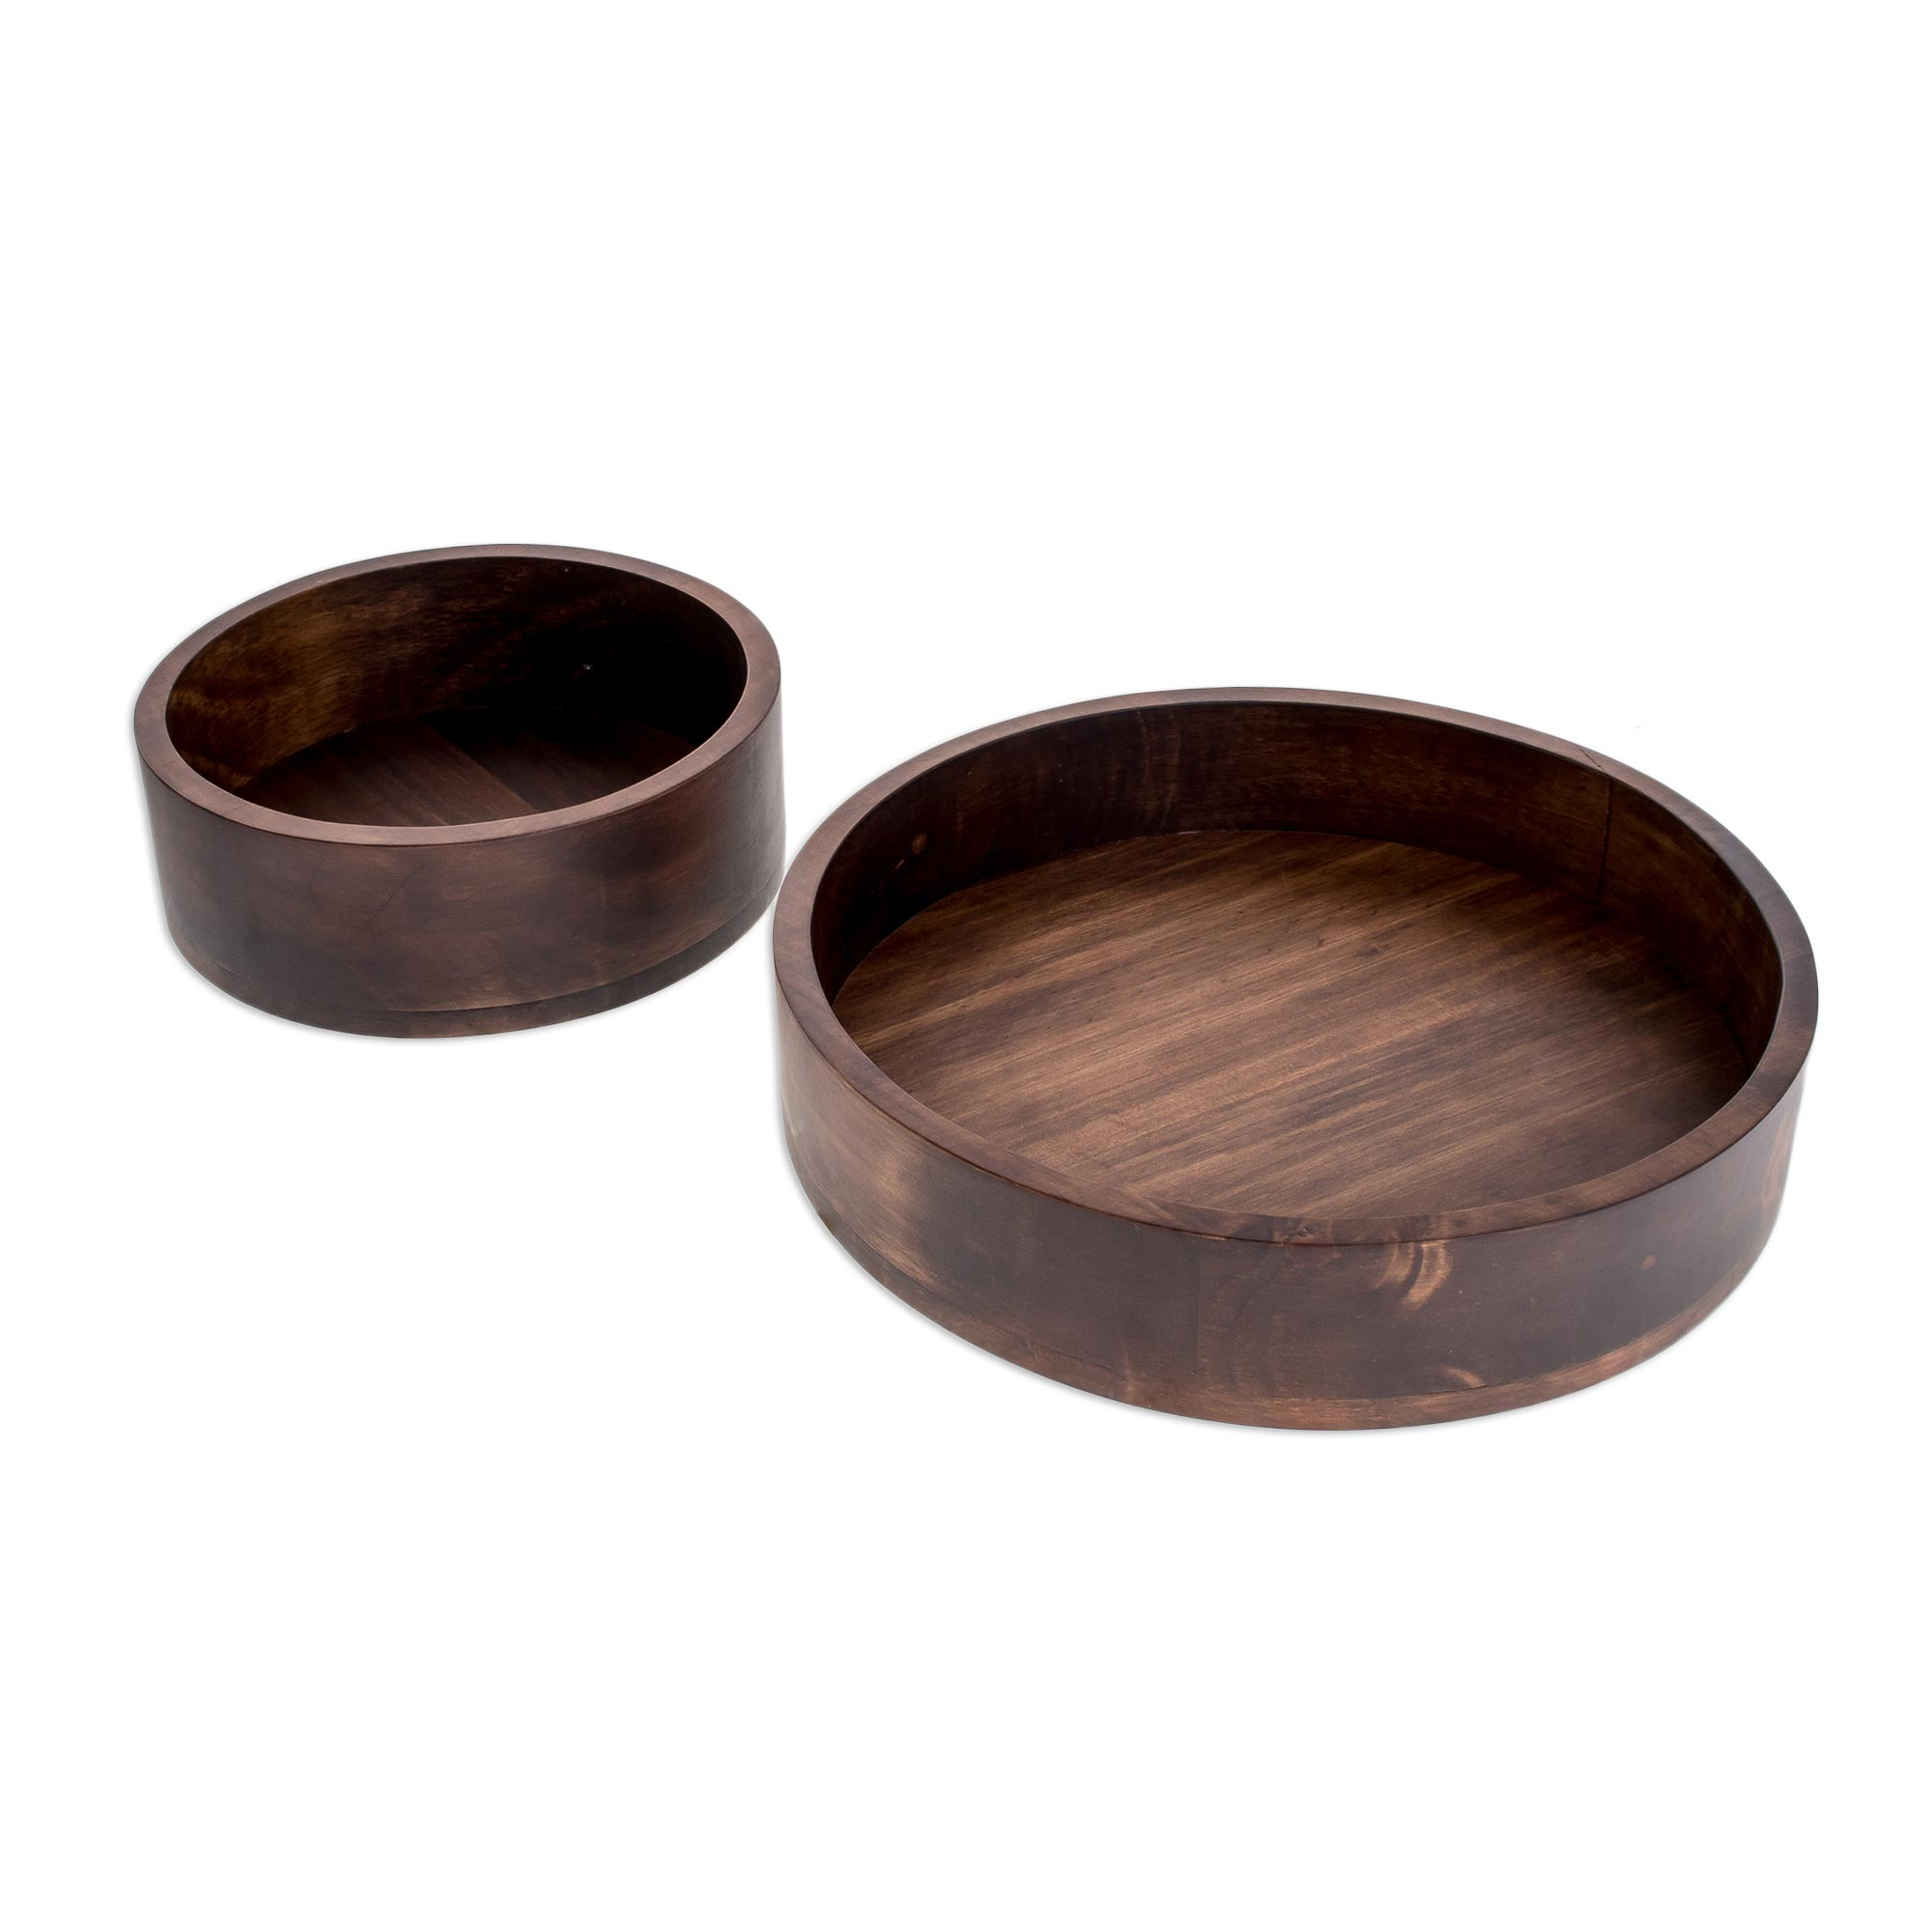 Modern Wood Bowl Centerpiece from Central America (Pair) - Maya Circle